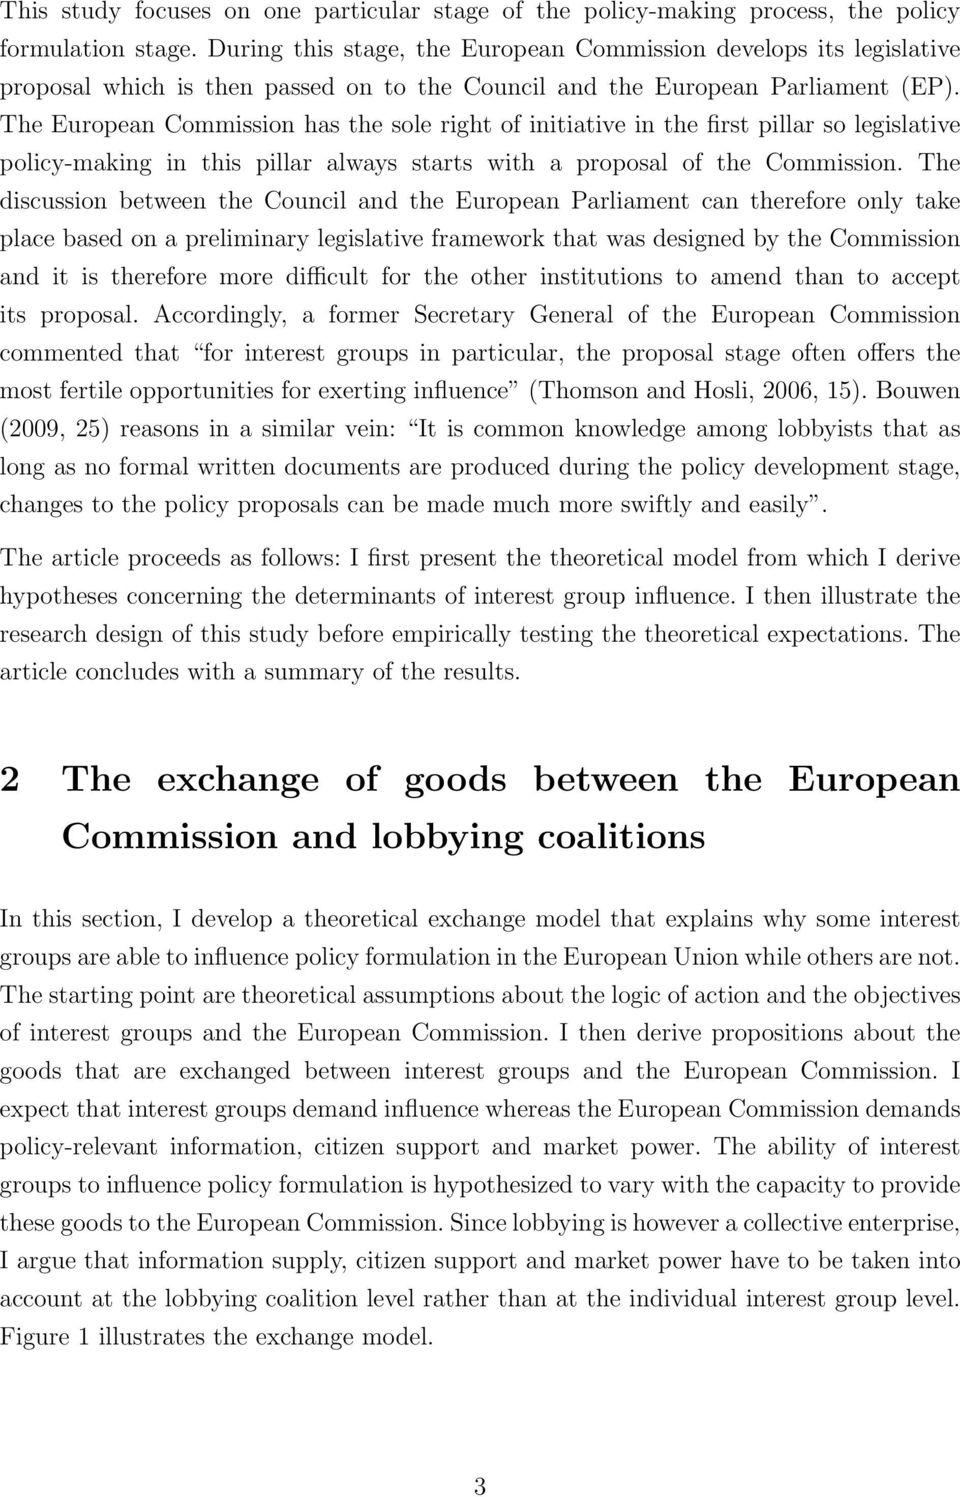 The European Commission has the sole right of initiative in the first pillar so legislative policy-making in this pillar always starts with a proposal of the Commission.